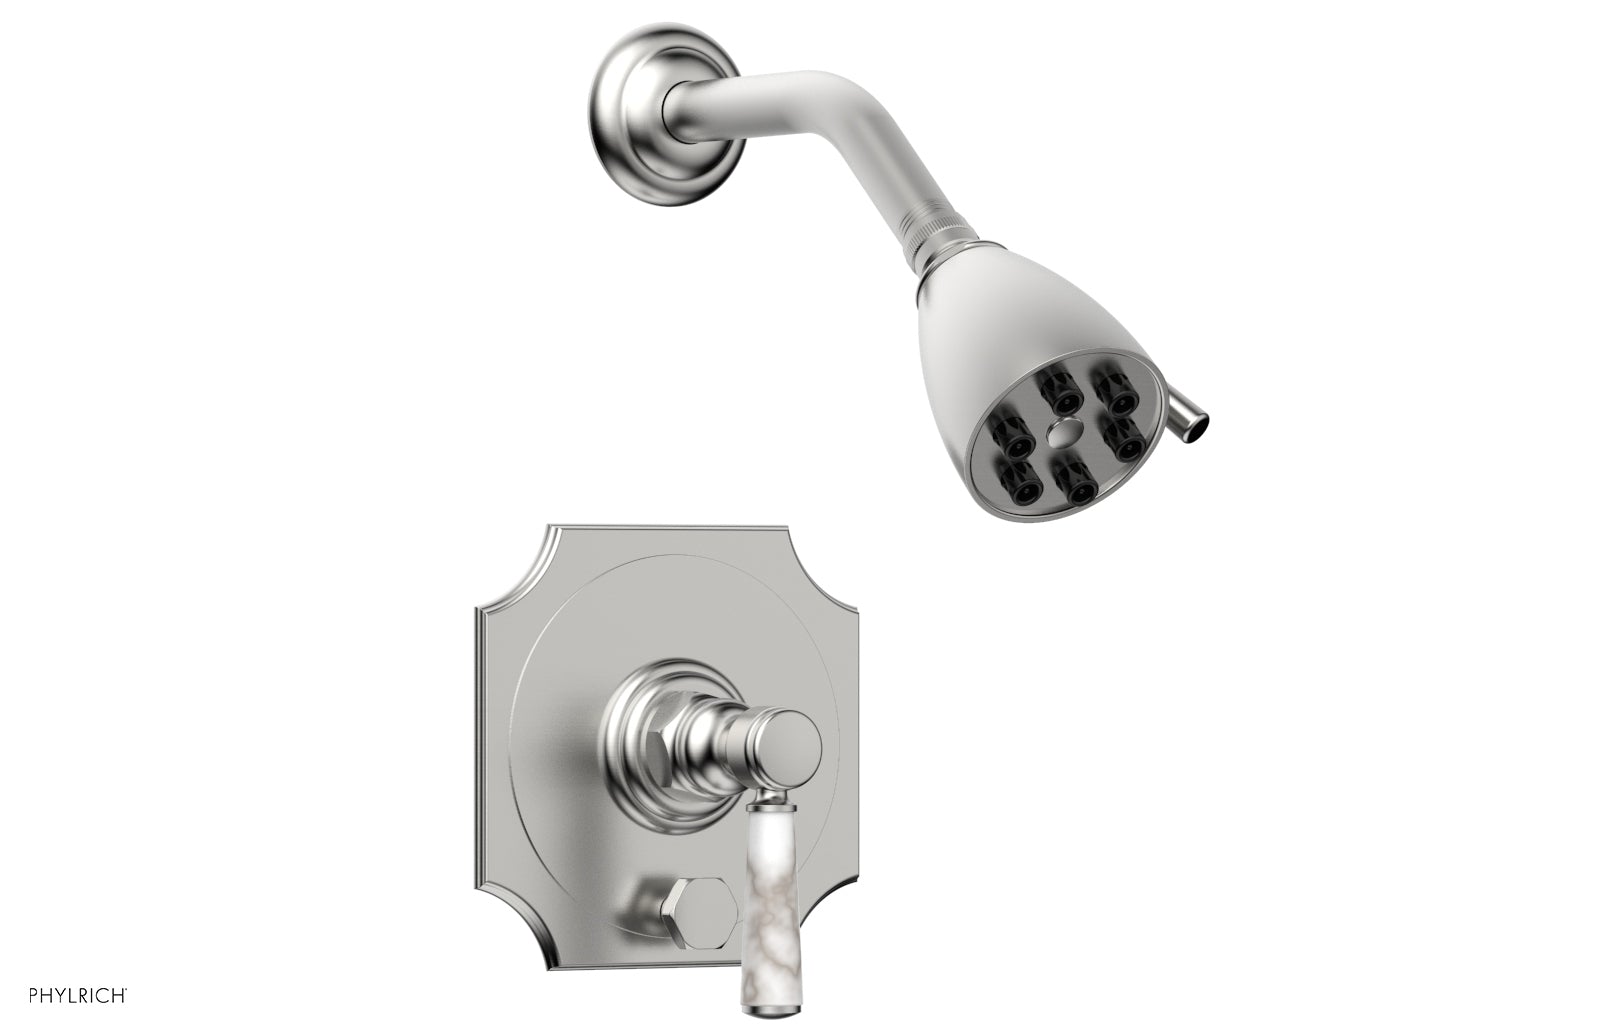 Phylrich HENRI Pressure Balance Shower and Diverter Set -White Marble Handle (Less Spout)